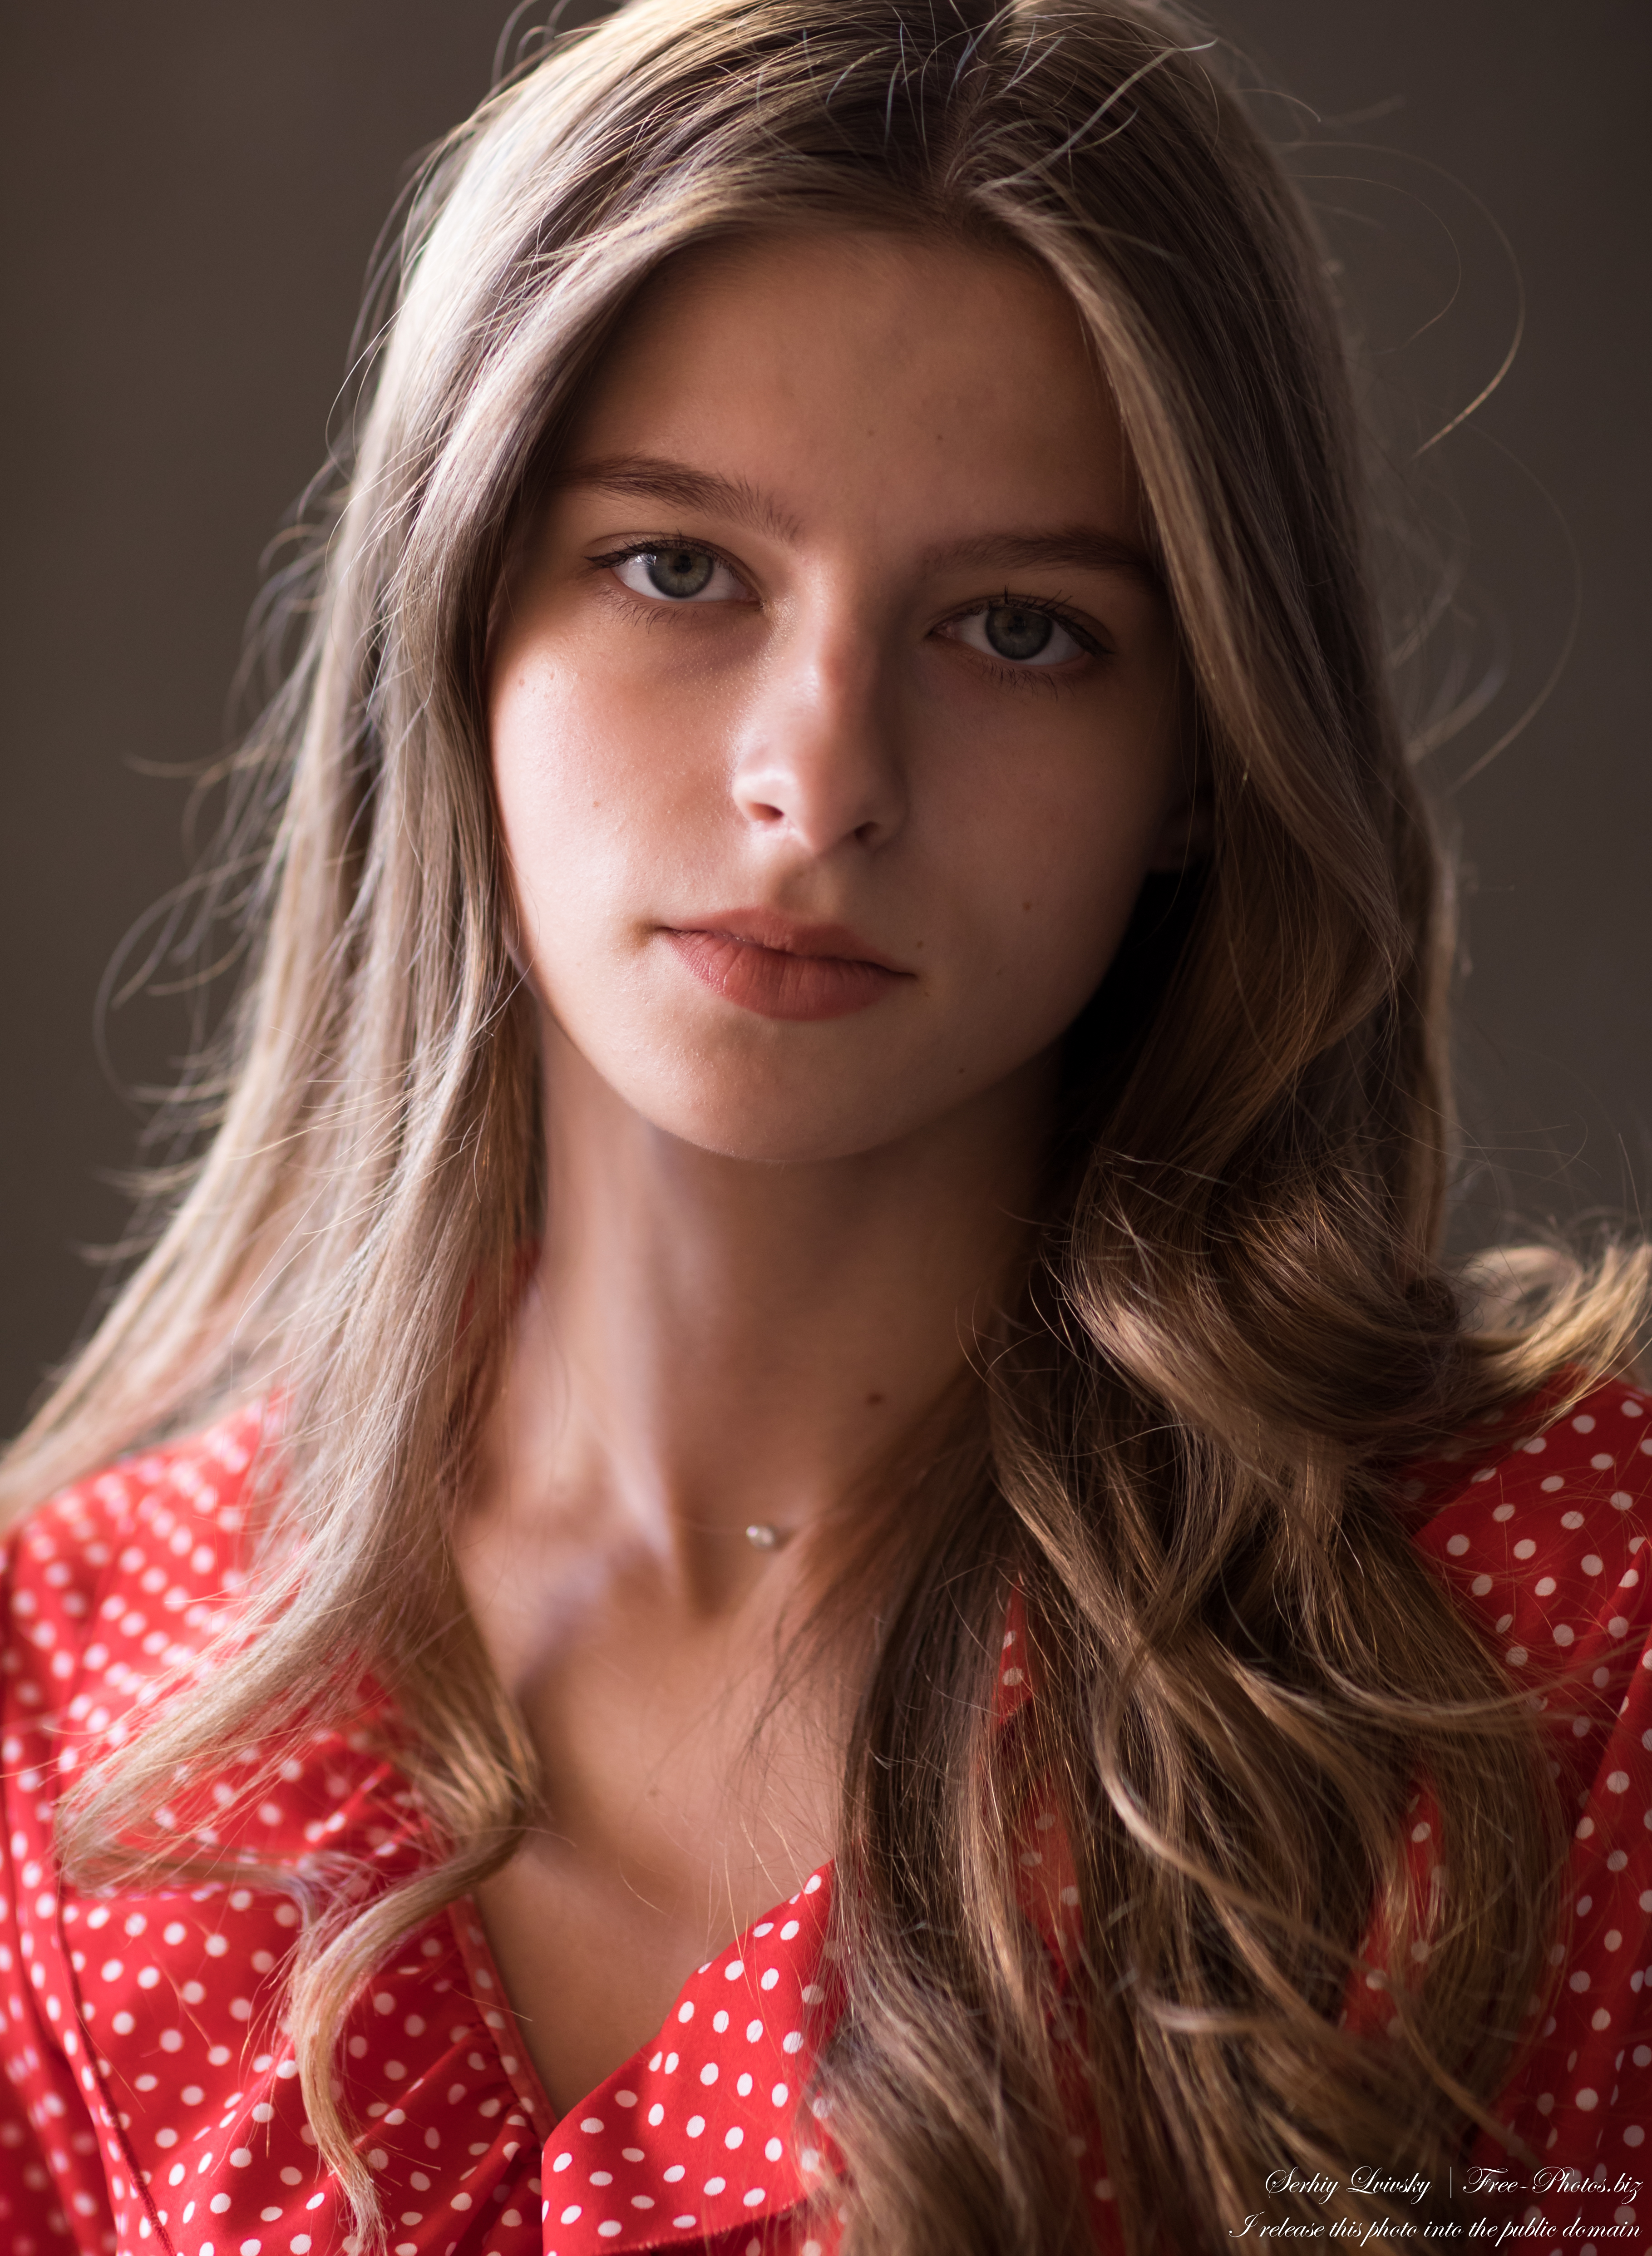 Juliana - a 17-year-old fair-haired creation of God photographed by Serhiy Lvivsky in September 2020, picture 20